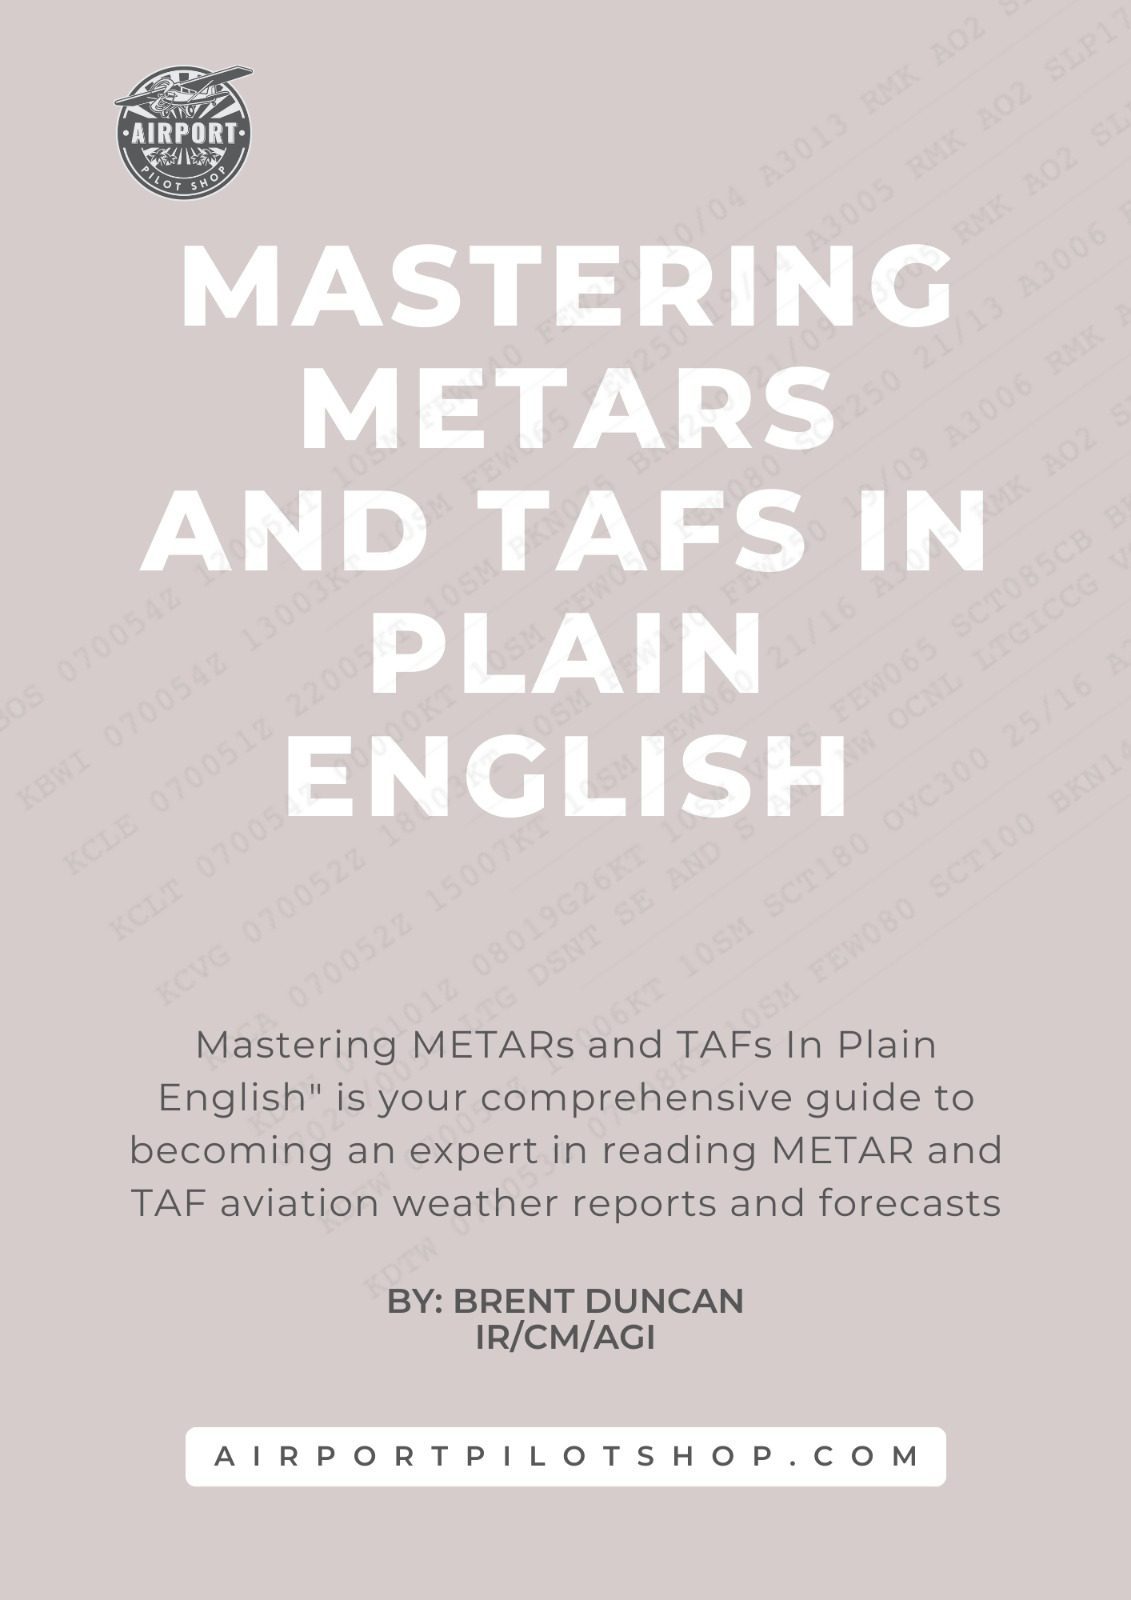 Demystifying METARs and TAFs: A Clear Guide for Aviators